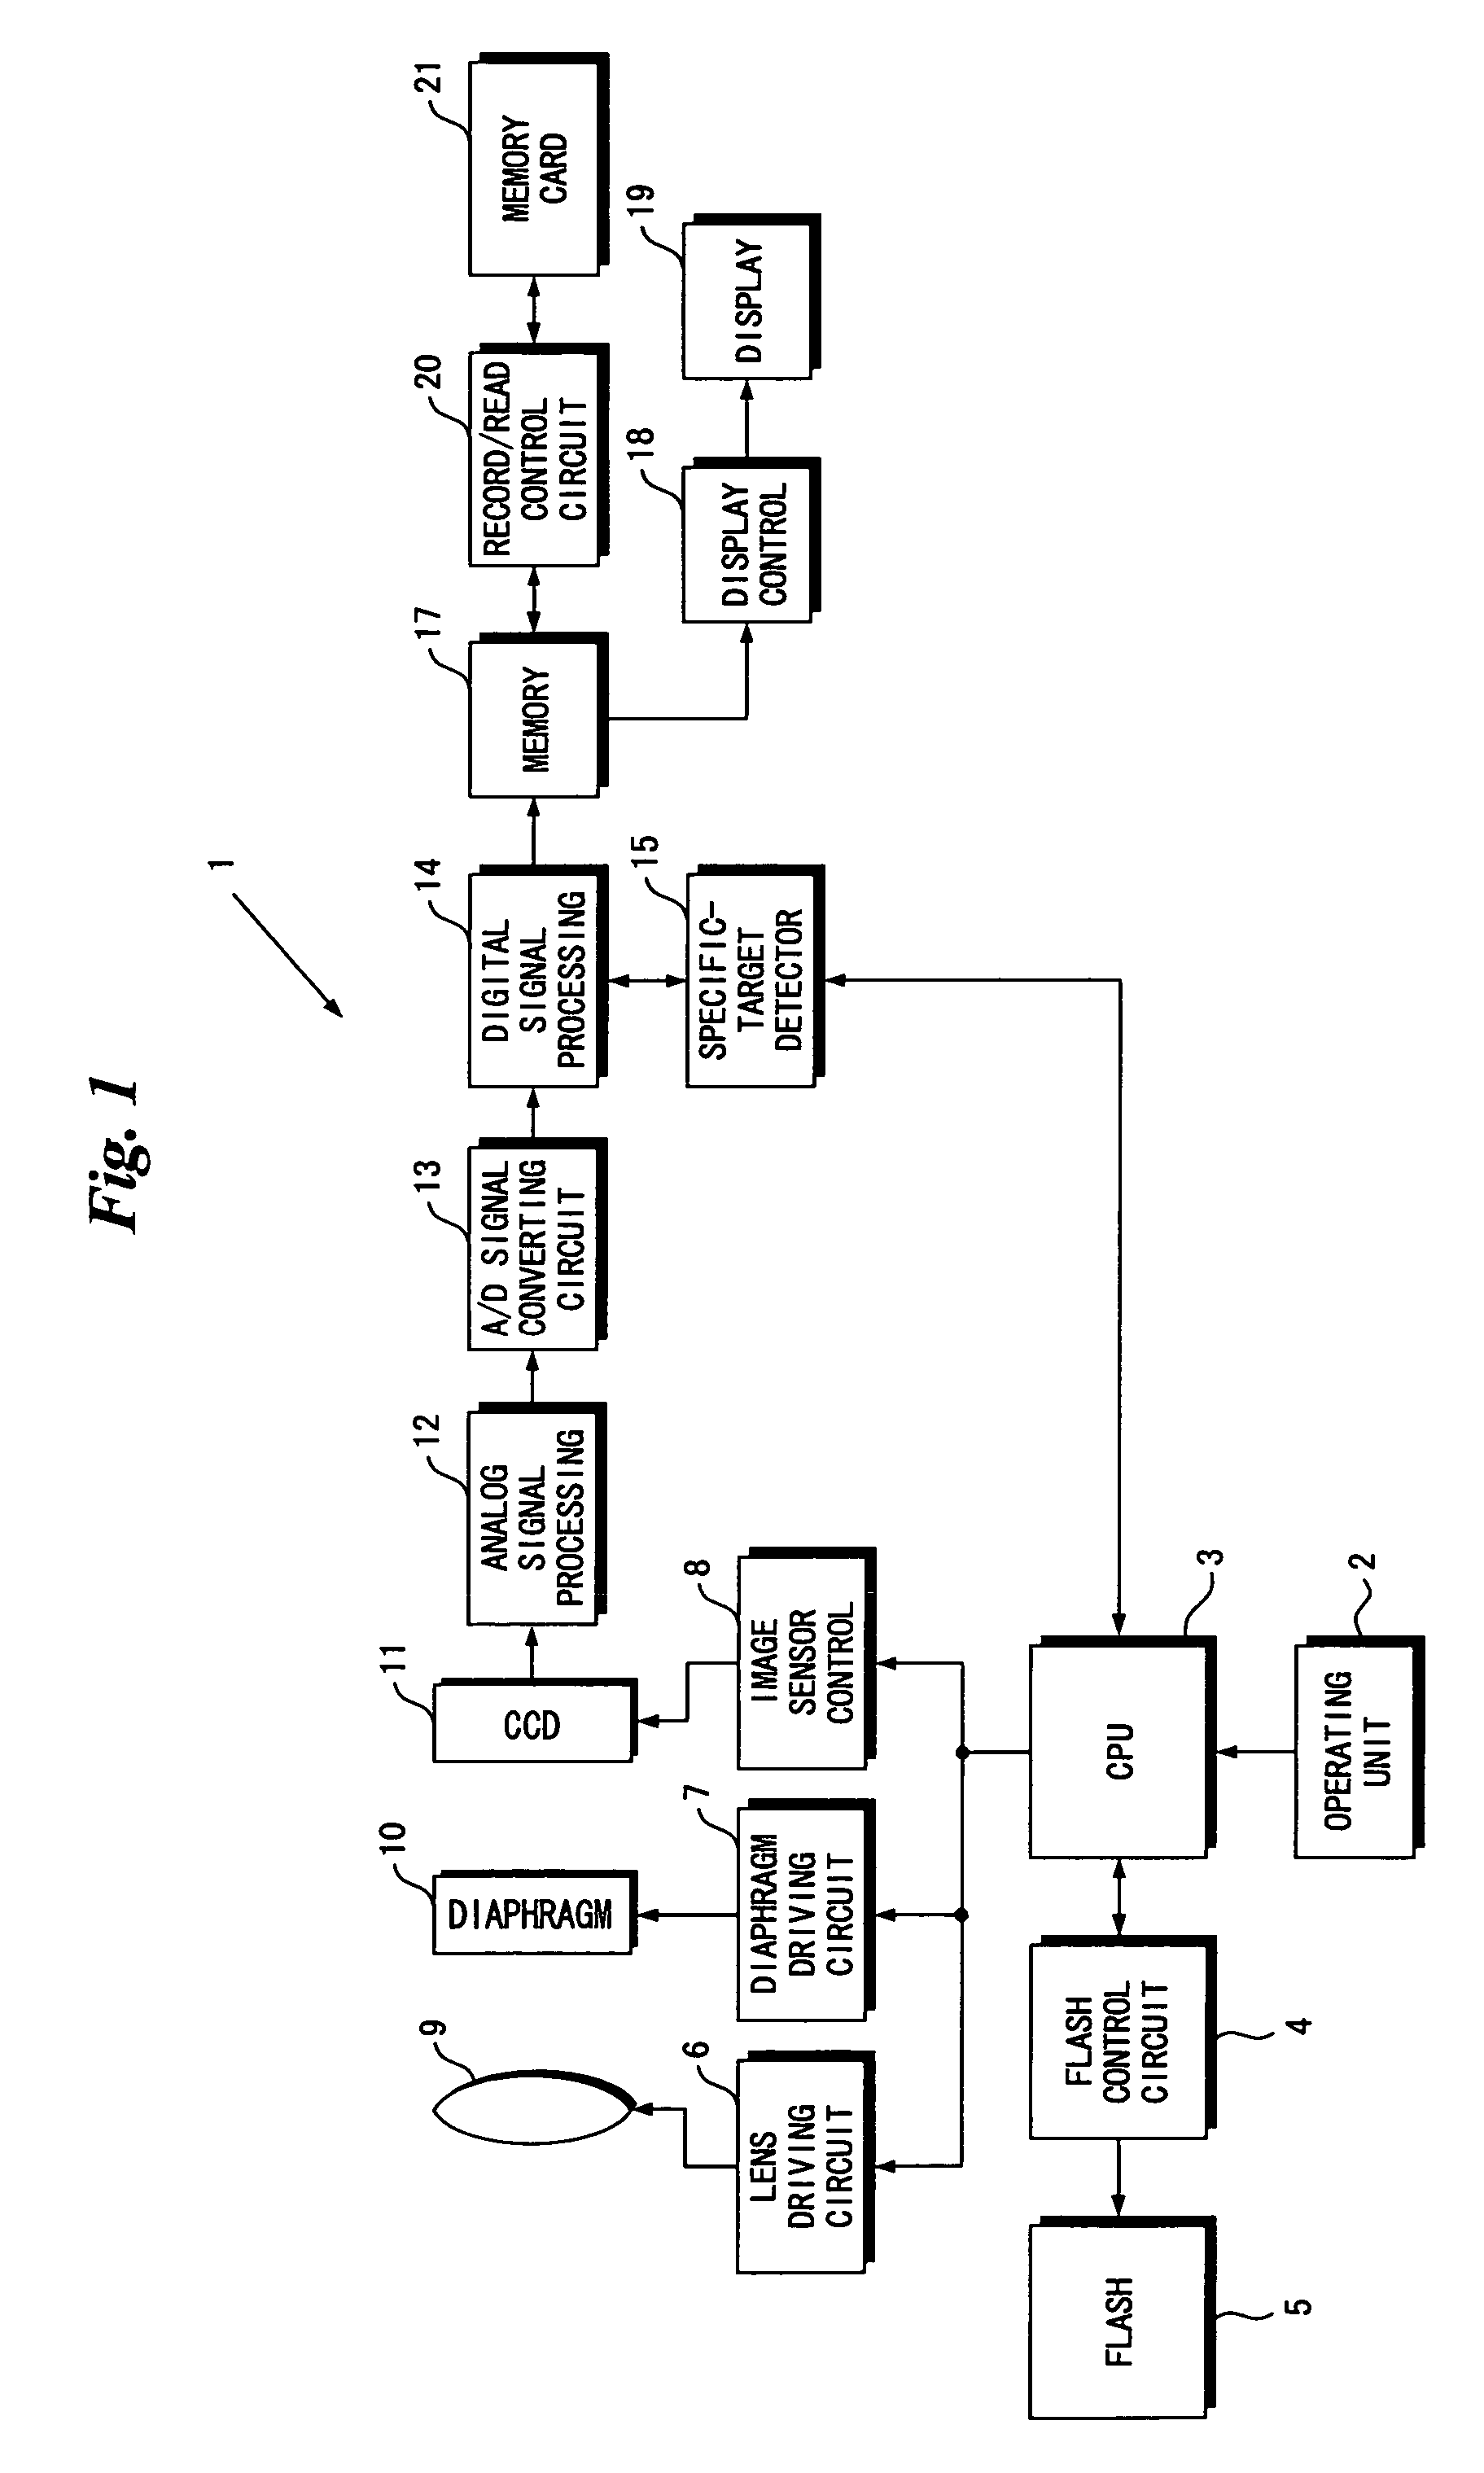 Image sensing system and method of controlling same